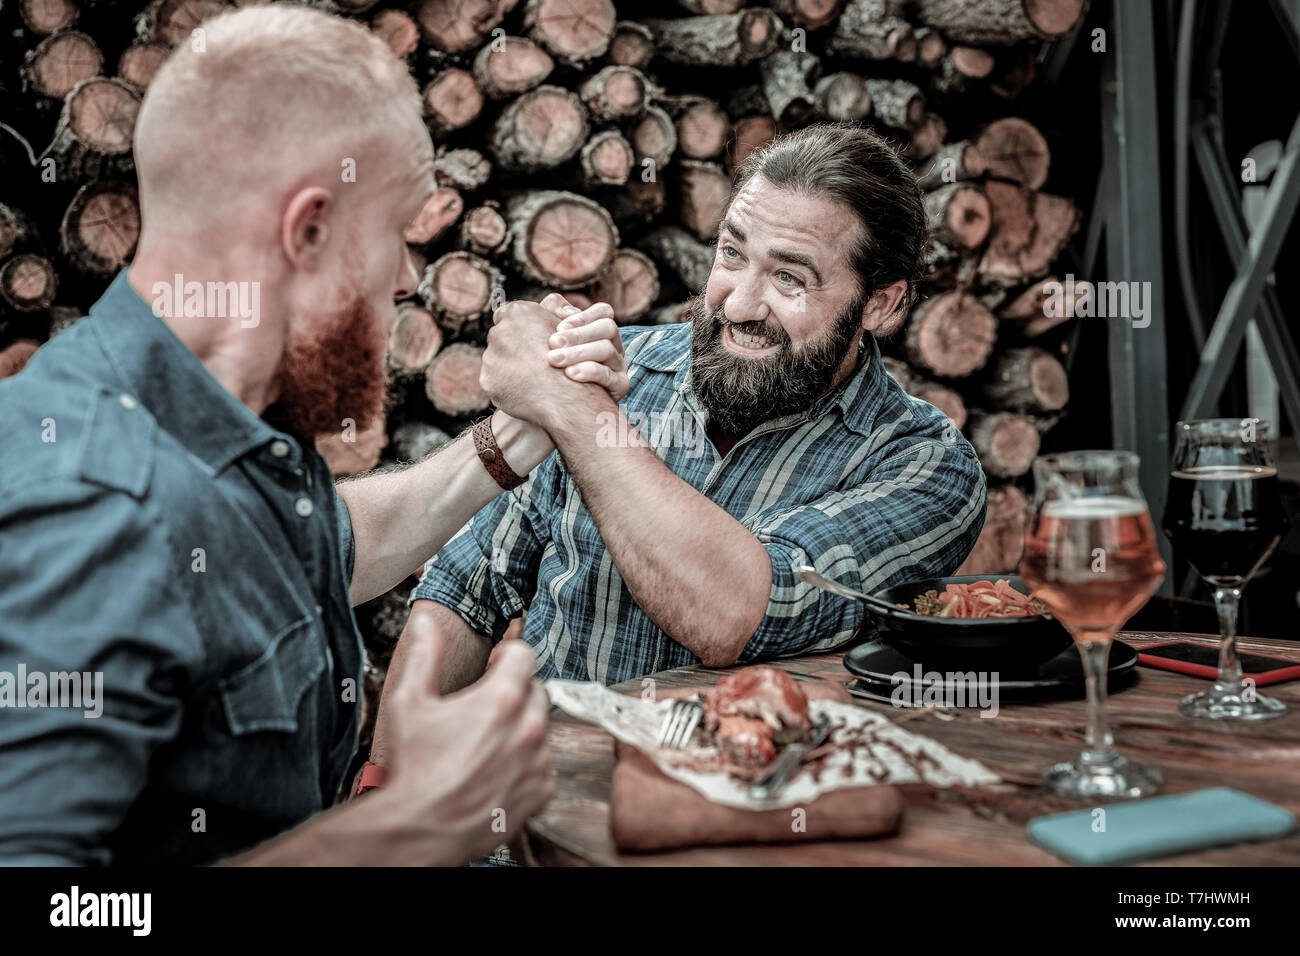 Two concentrated mature men competing in arm-wrestling. Stock Photo